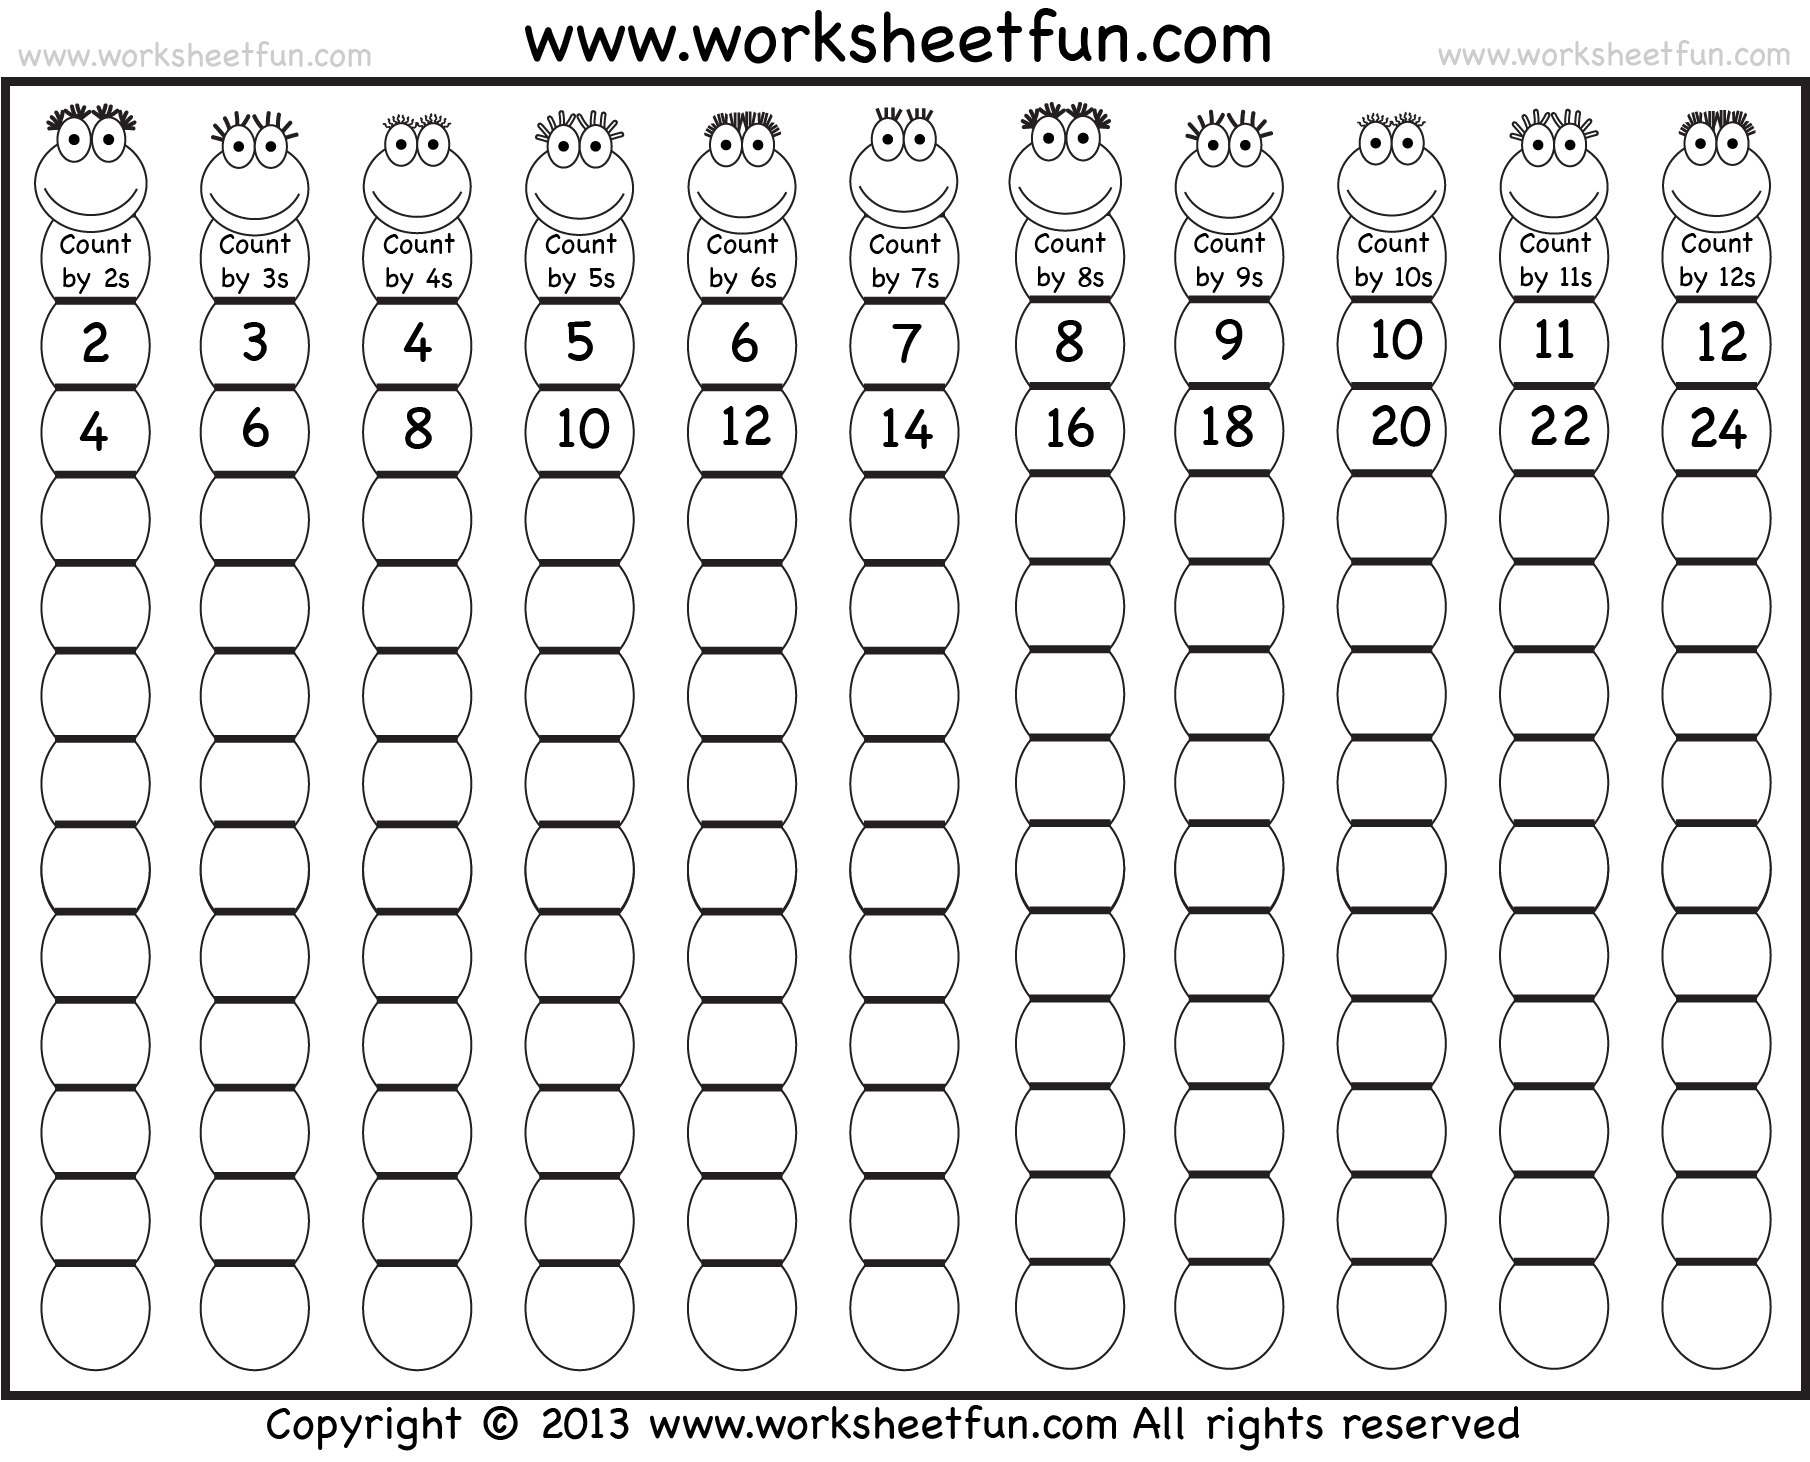 Skip Counting by 2, 3, 4, 5, 6, 7, 8, 9, 10, 11 and 12 Two Worksheets